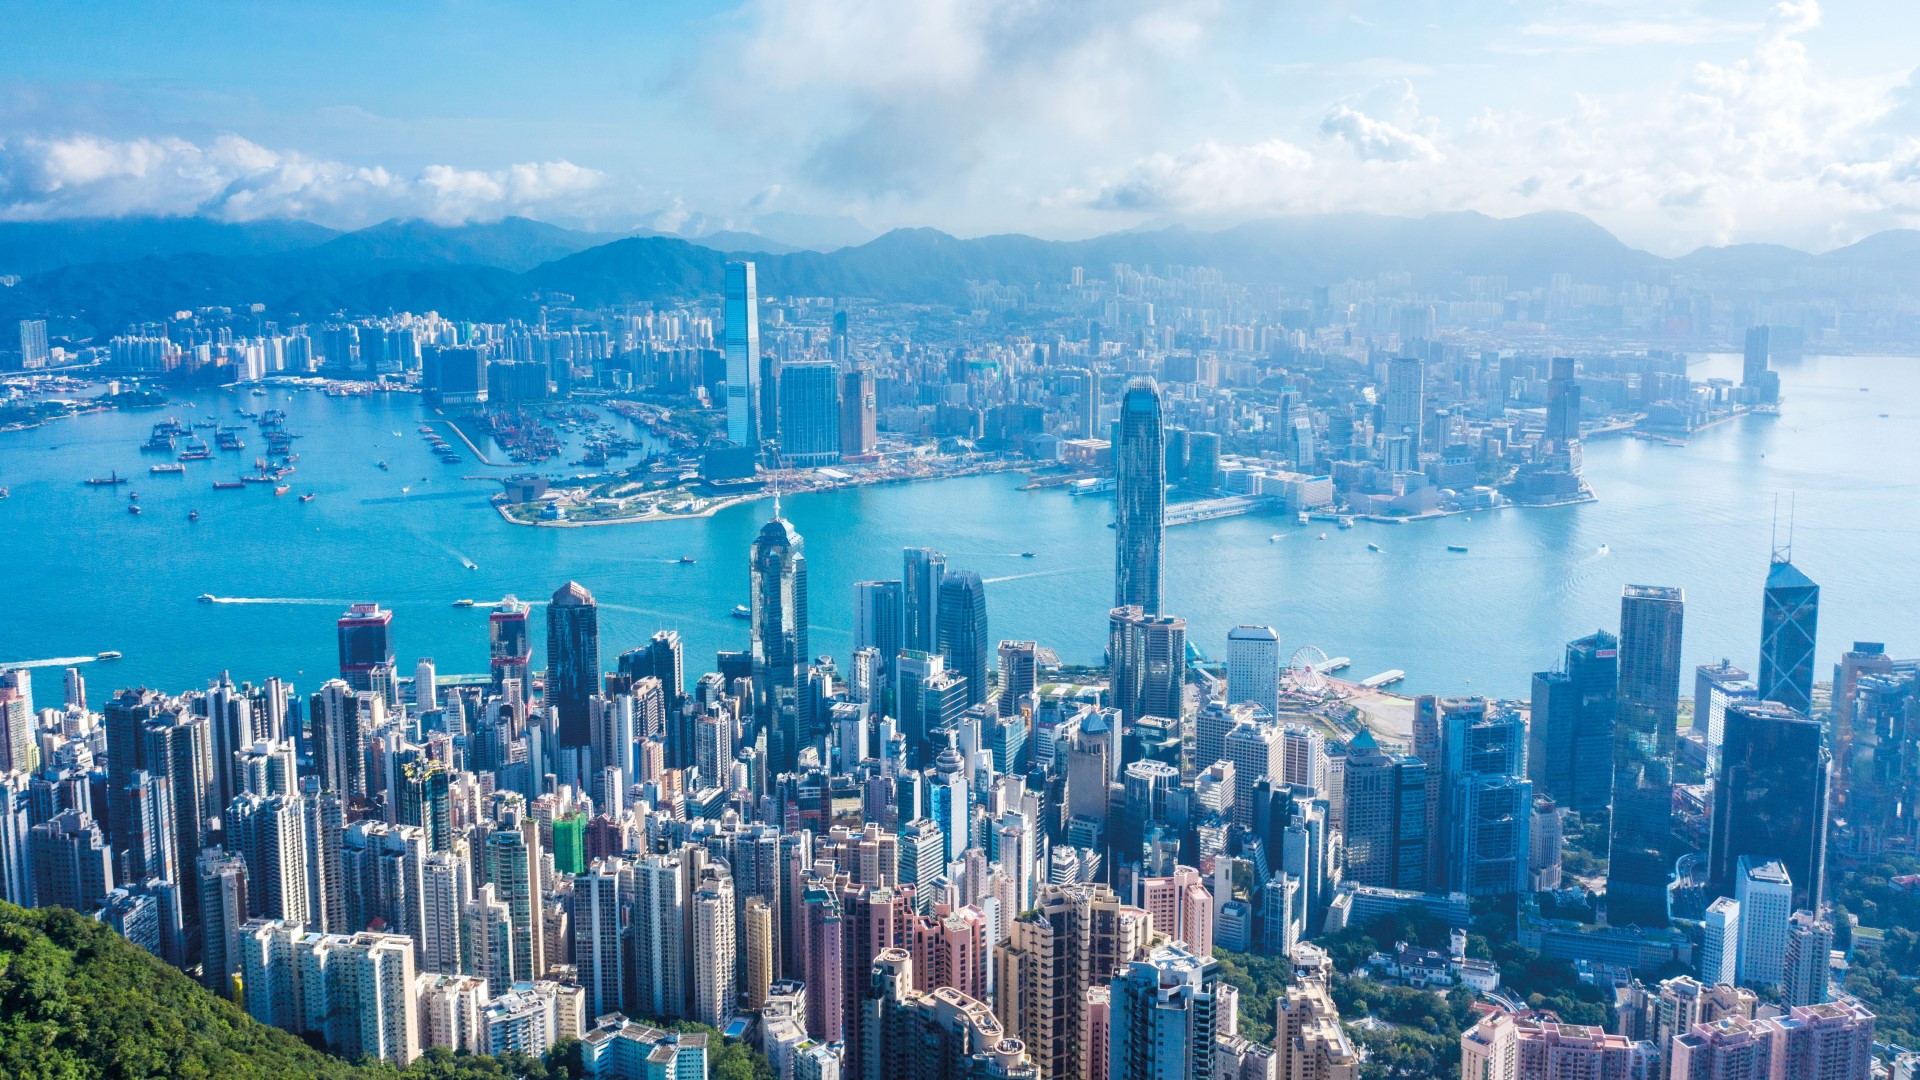 10 spots to marvel at Victoria Harbour | Hong Kong Tourism Board